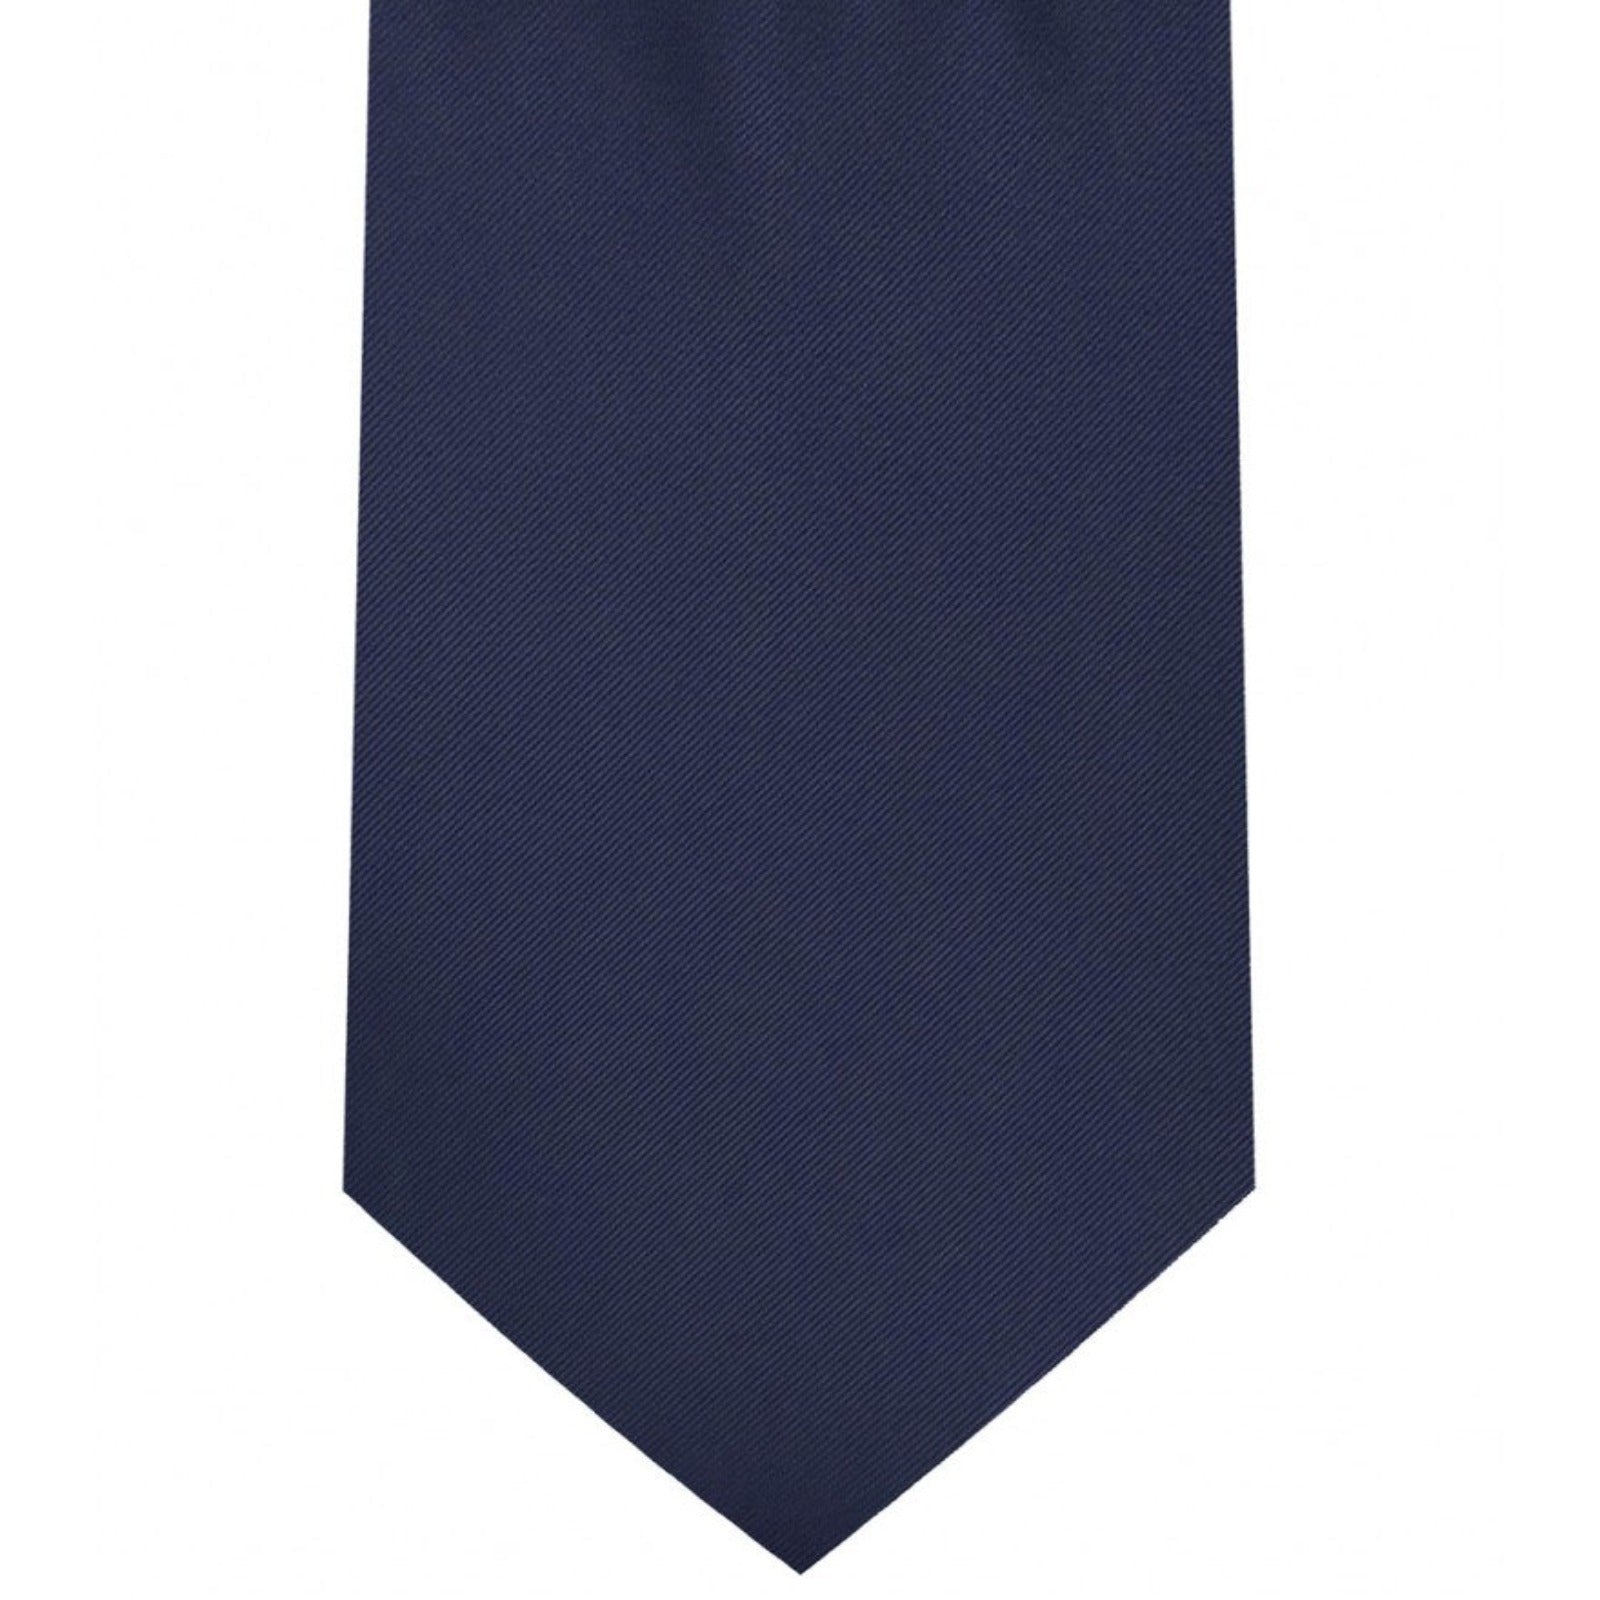 Classic Navy Blue Tie Regular width 3.5 inches With Matching Pocket Square | KCT Menswear 